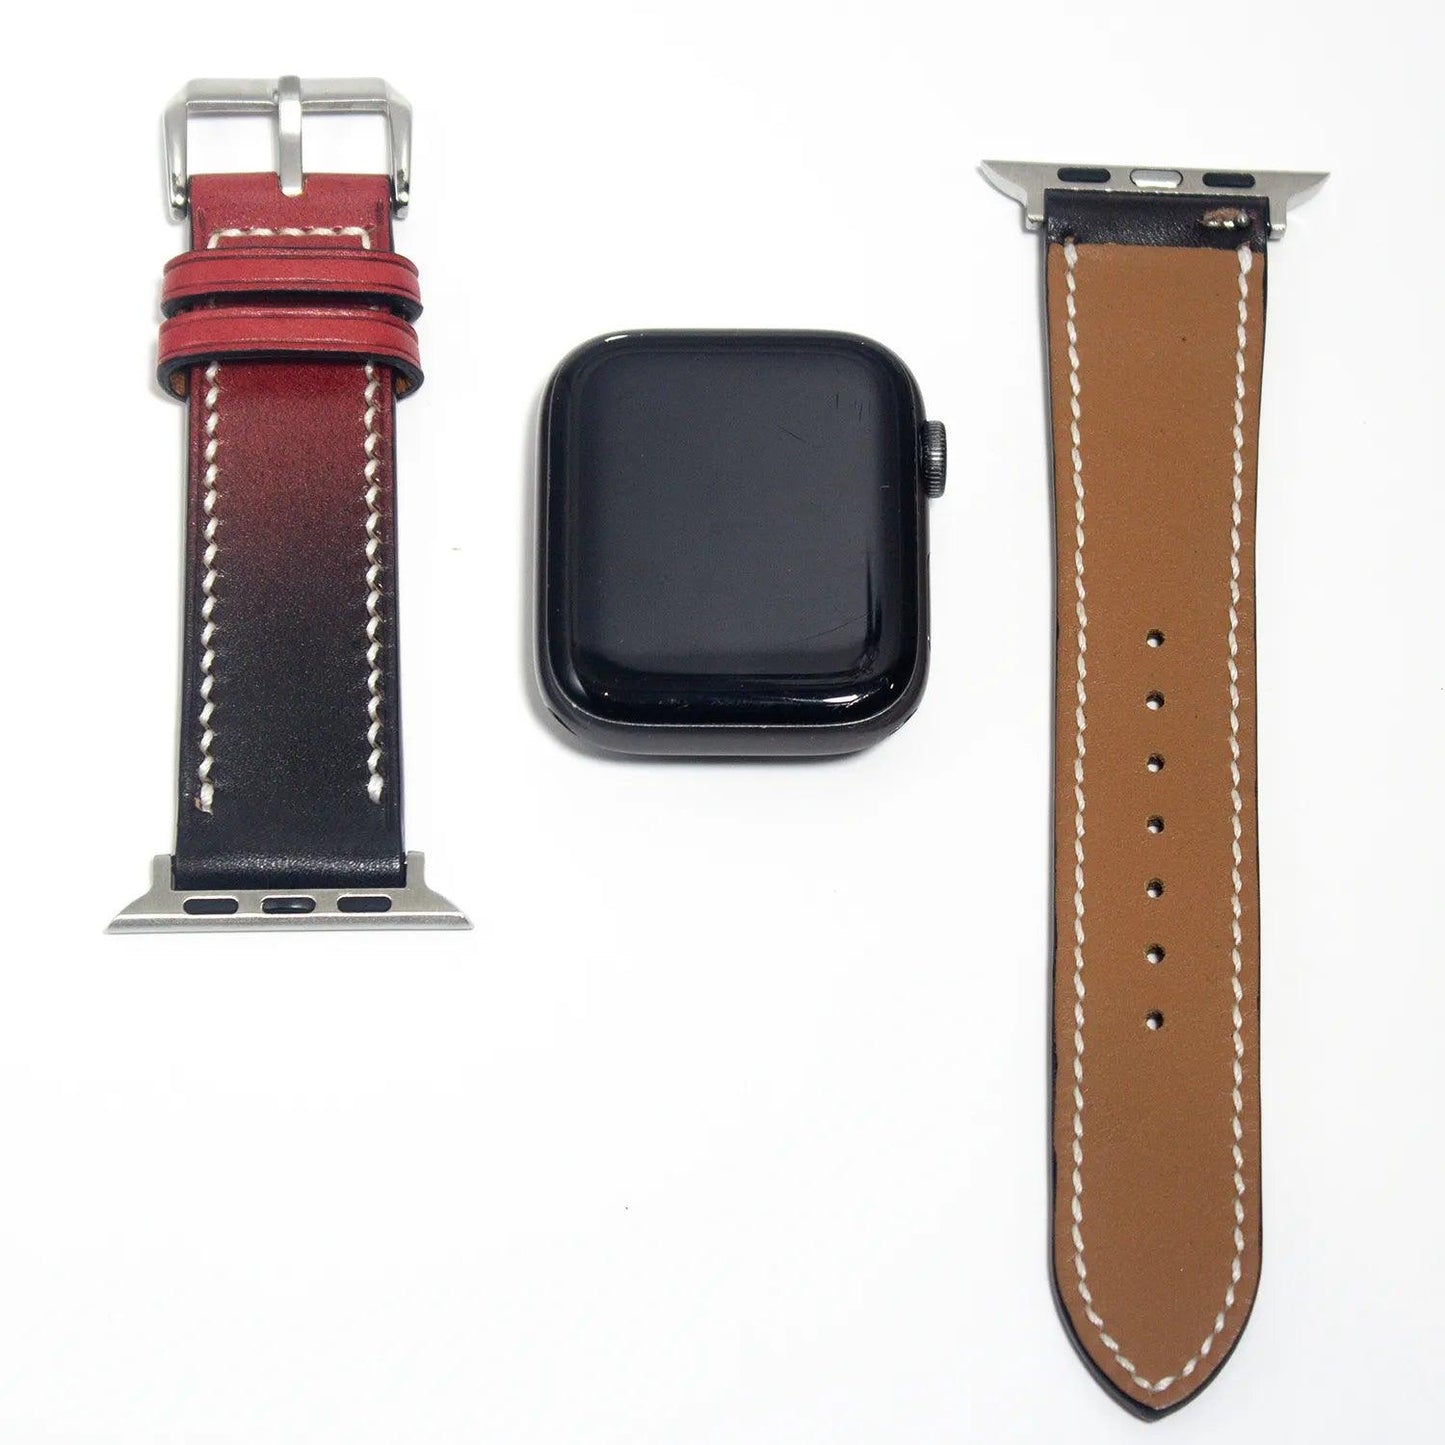 Durable leather watch straps made from Veg leather, featuring a red to black gradient for a visually stunning transition.